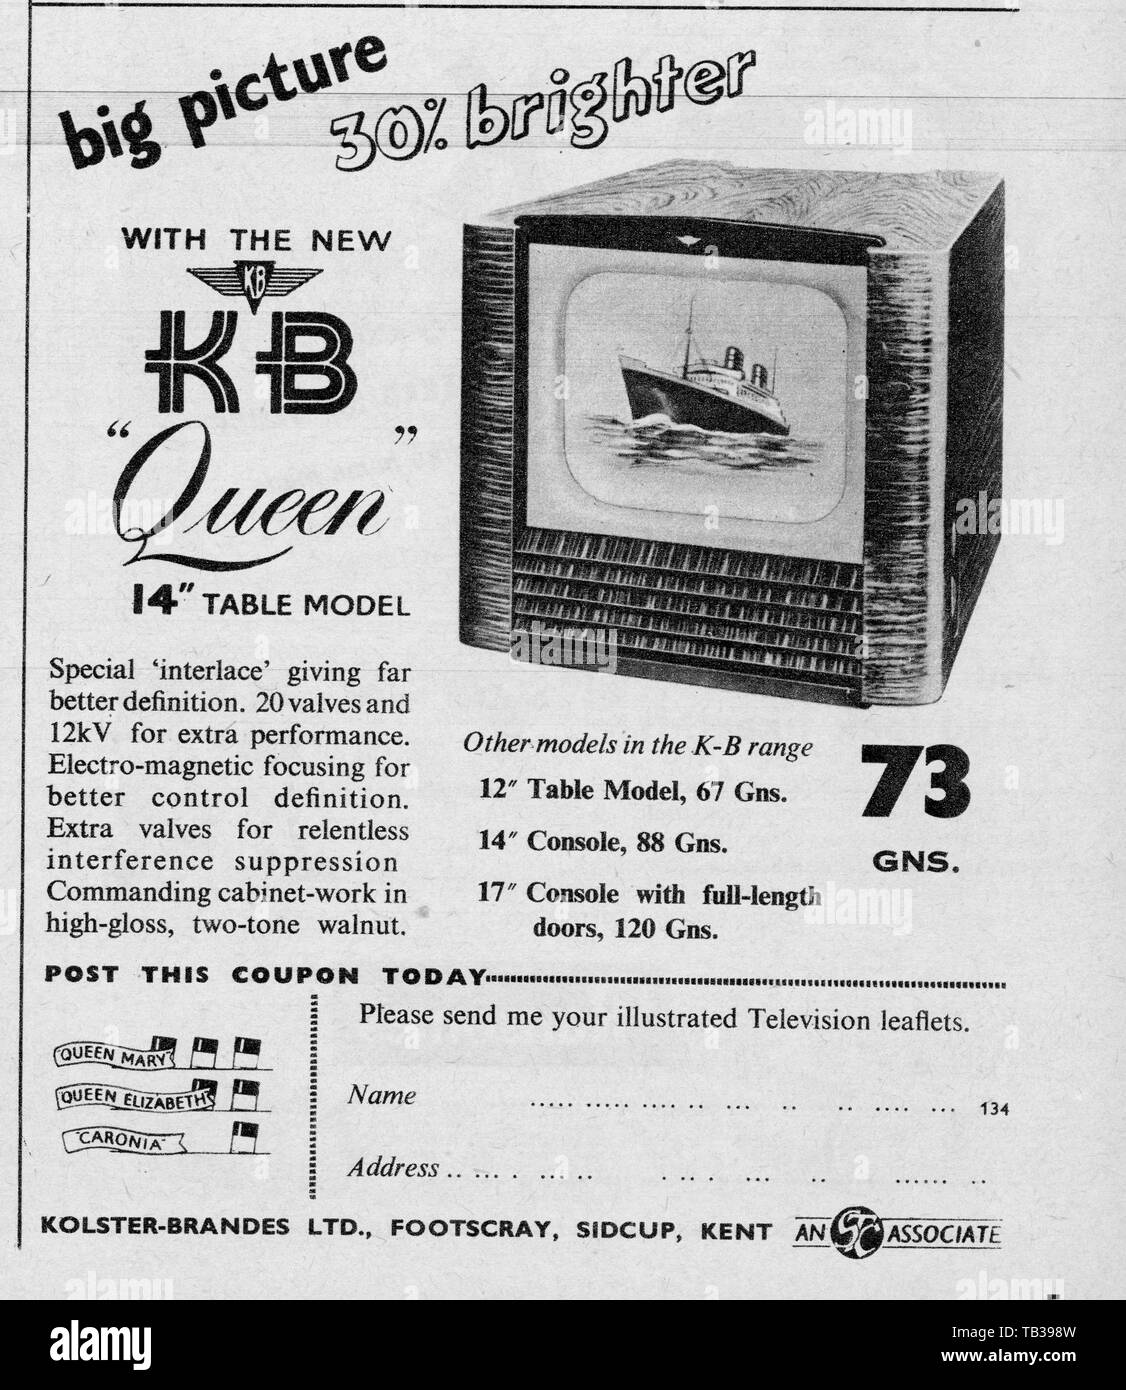 KB Queen Television Set 14' Table Model 73 Guineas  Advert 4 April 1953       Photo by Tony Henshaw Stock Photo